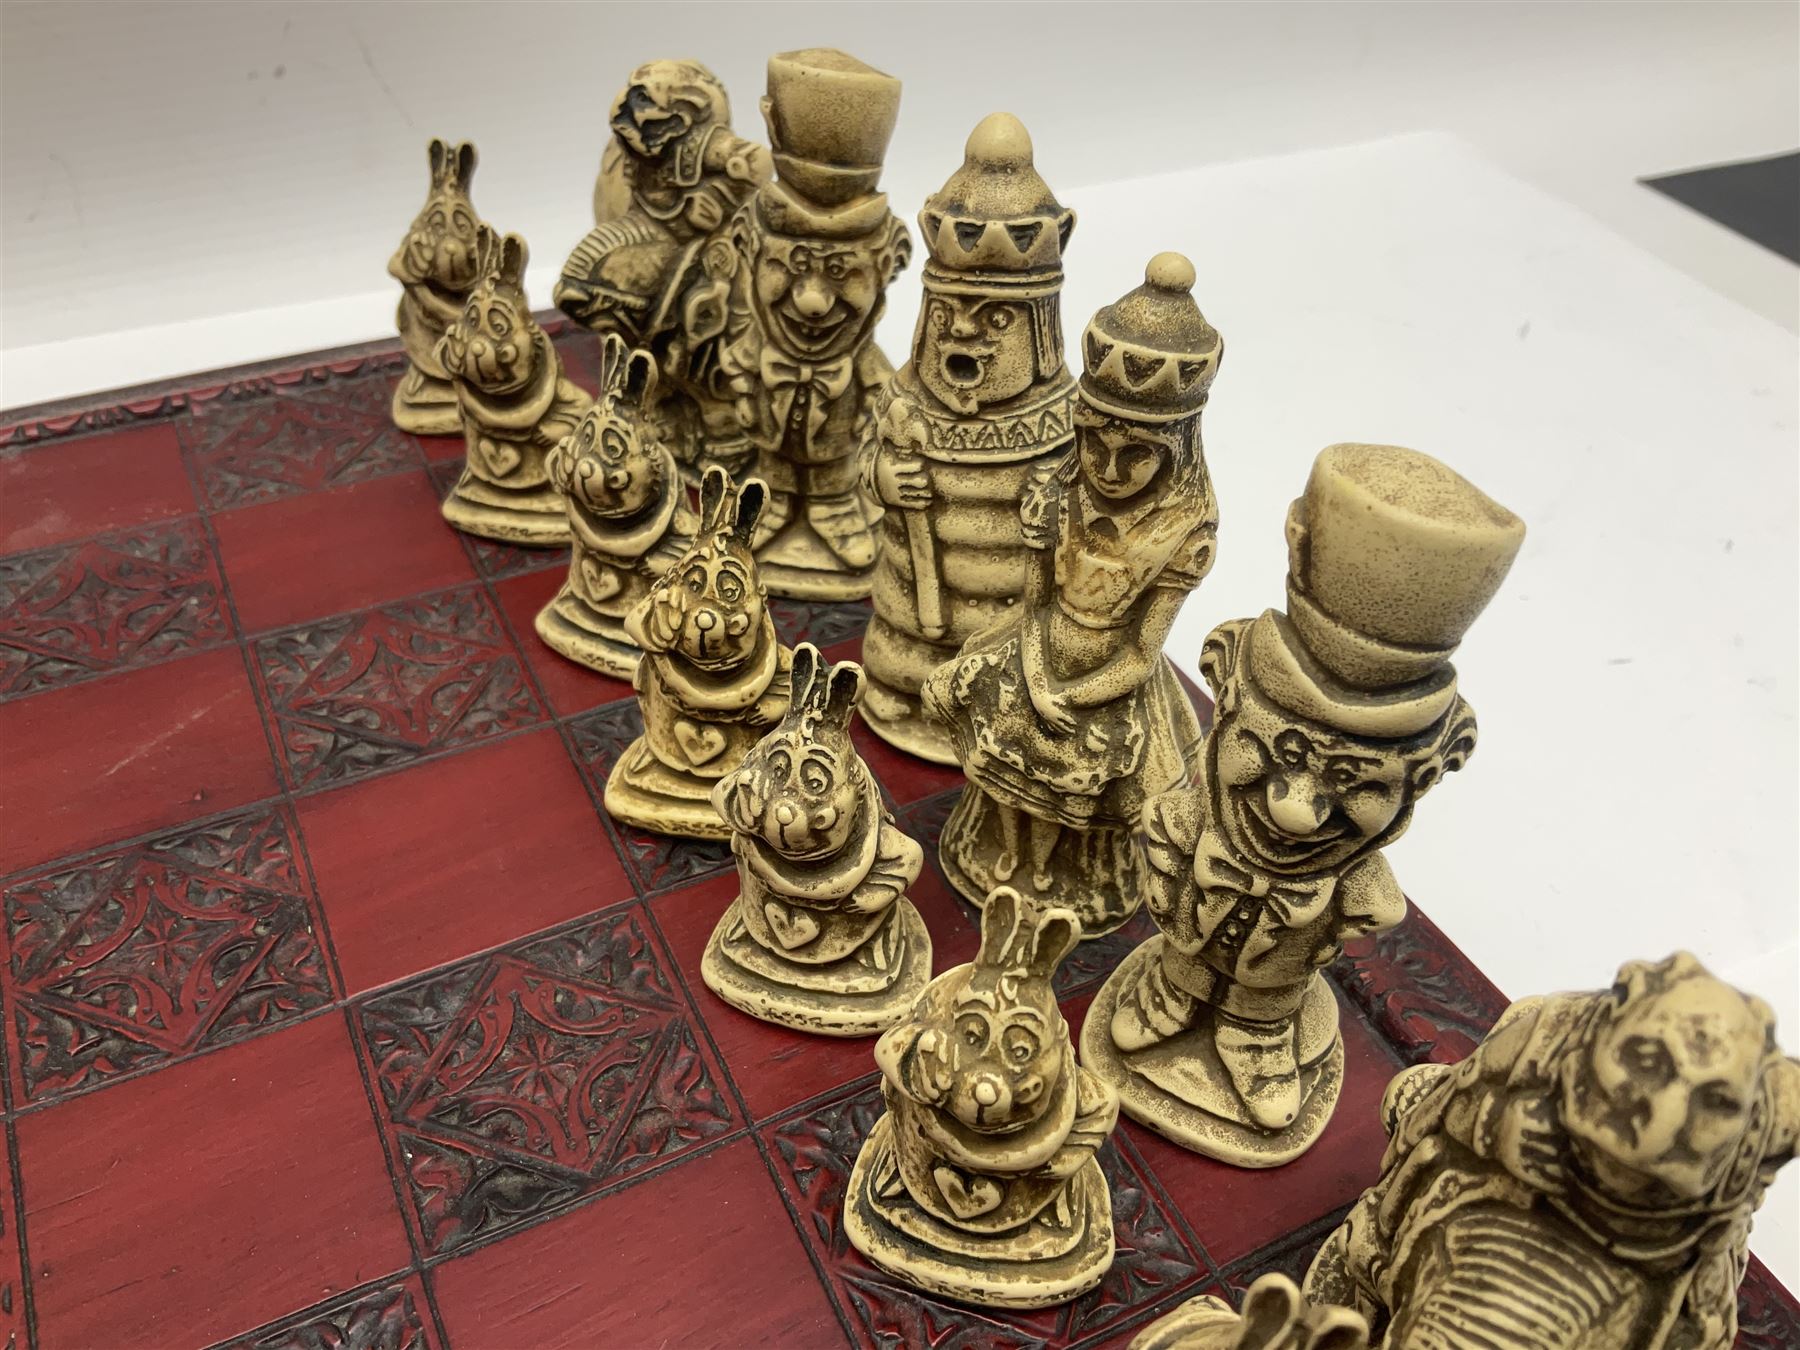 Alice in Wonderland themed chess set - Image 3 of 11